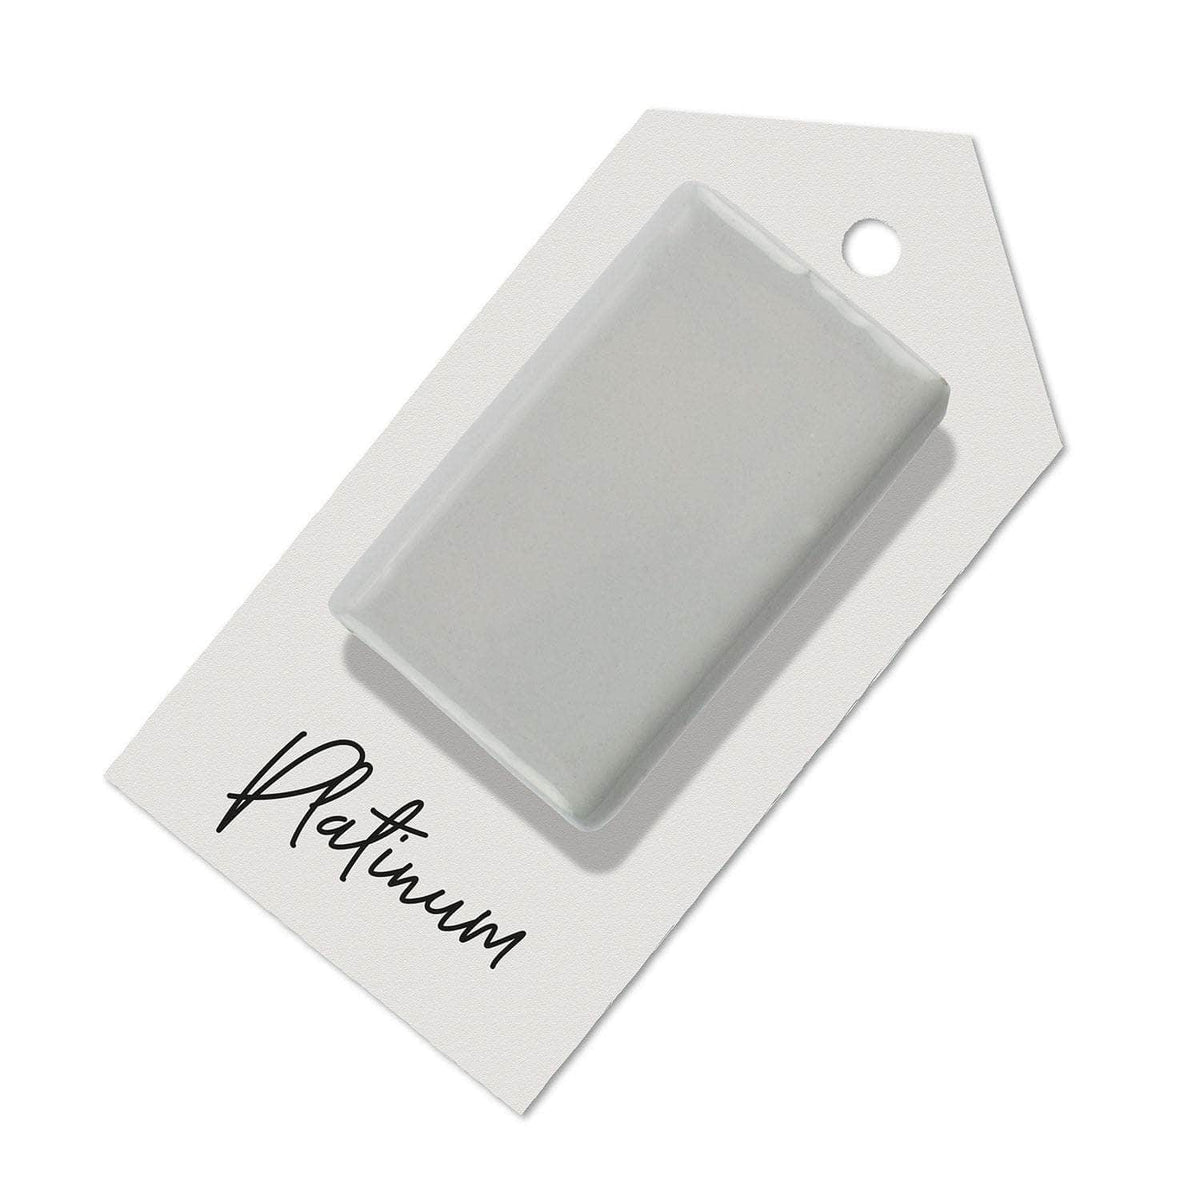 Platinum sample for Aga range cooker re-enamelling &amp; reconditioned cookers